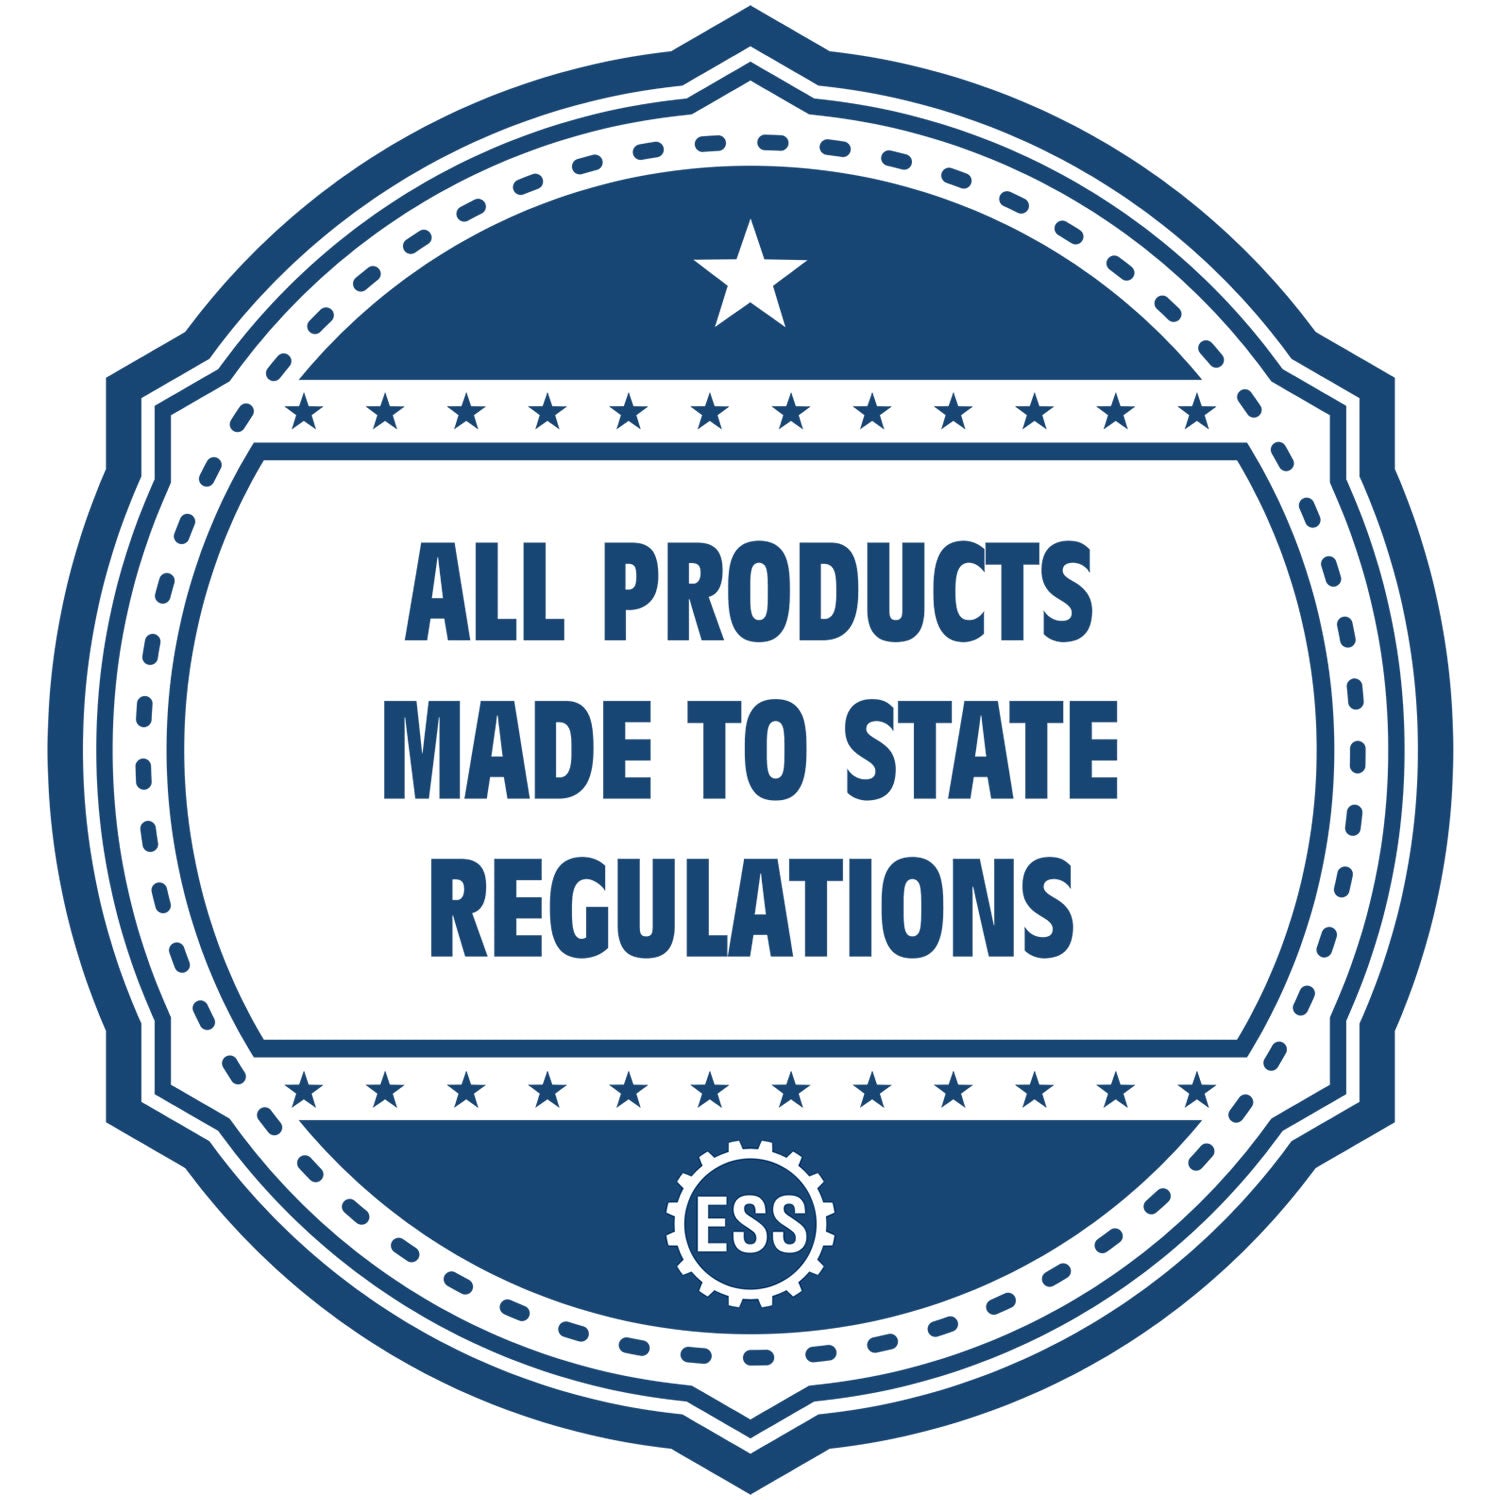 A blue icon or badge for the Gift Wisconsin Landscape Architect Seal showing that this product is made in compliance with state regulations.